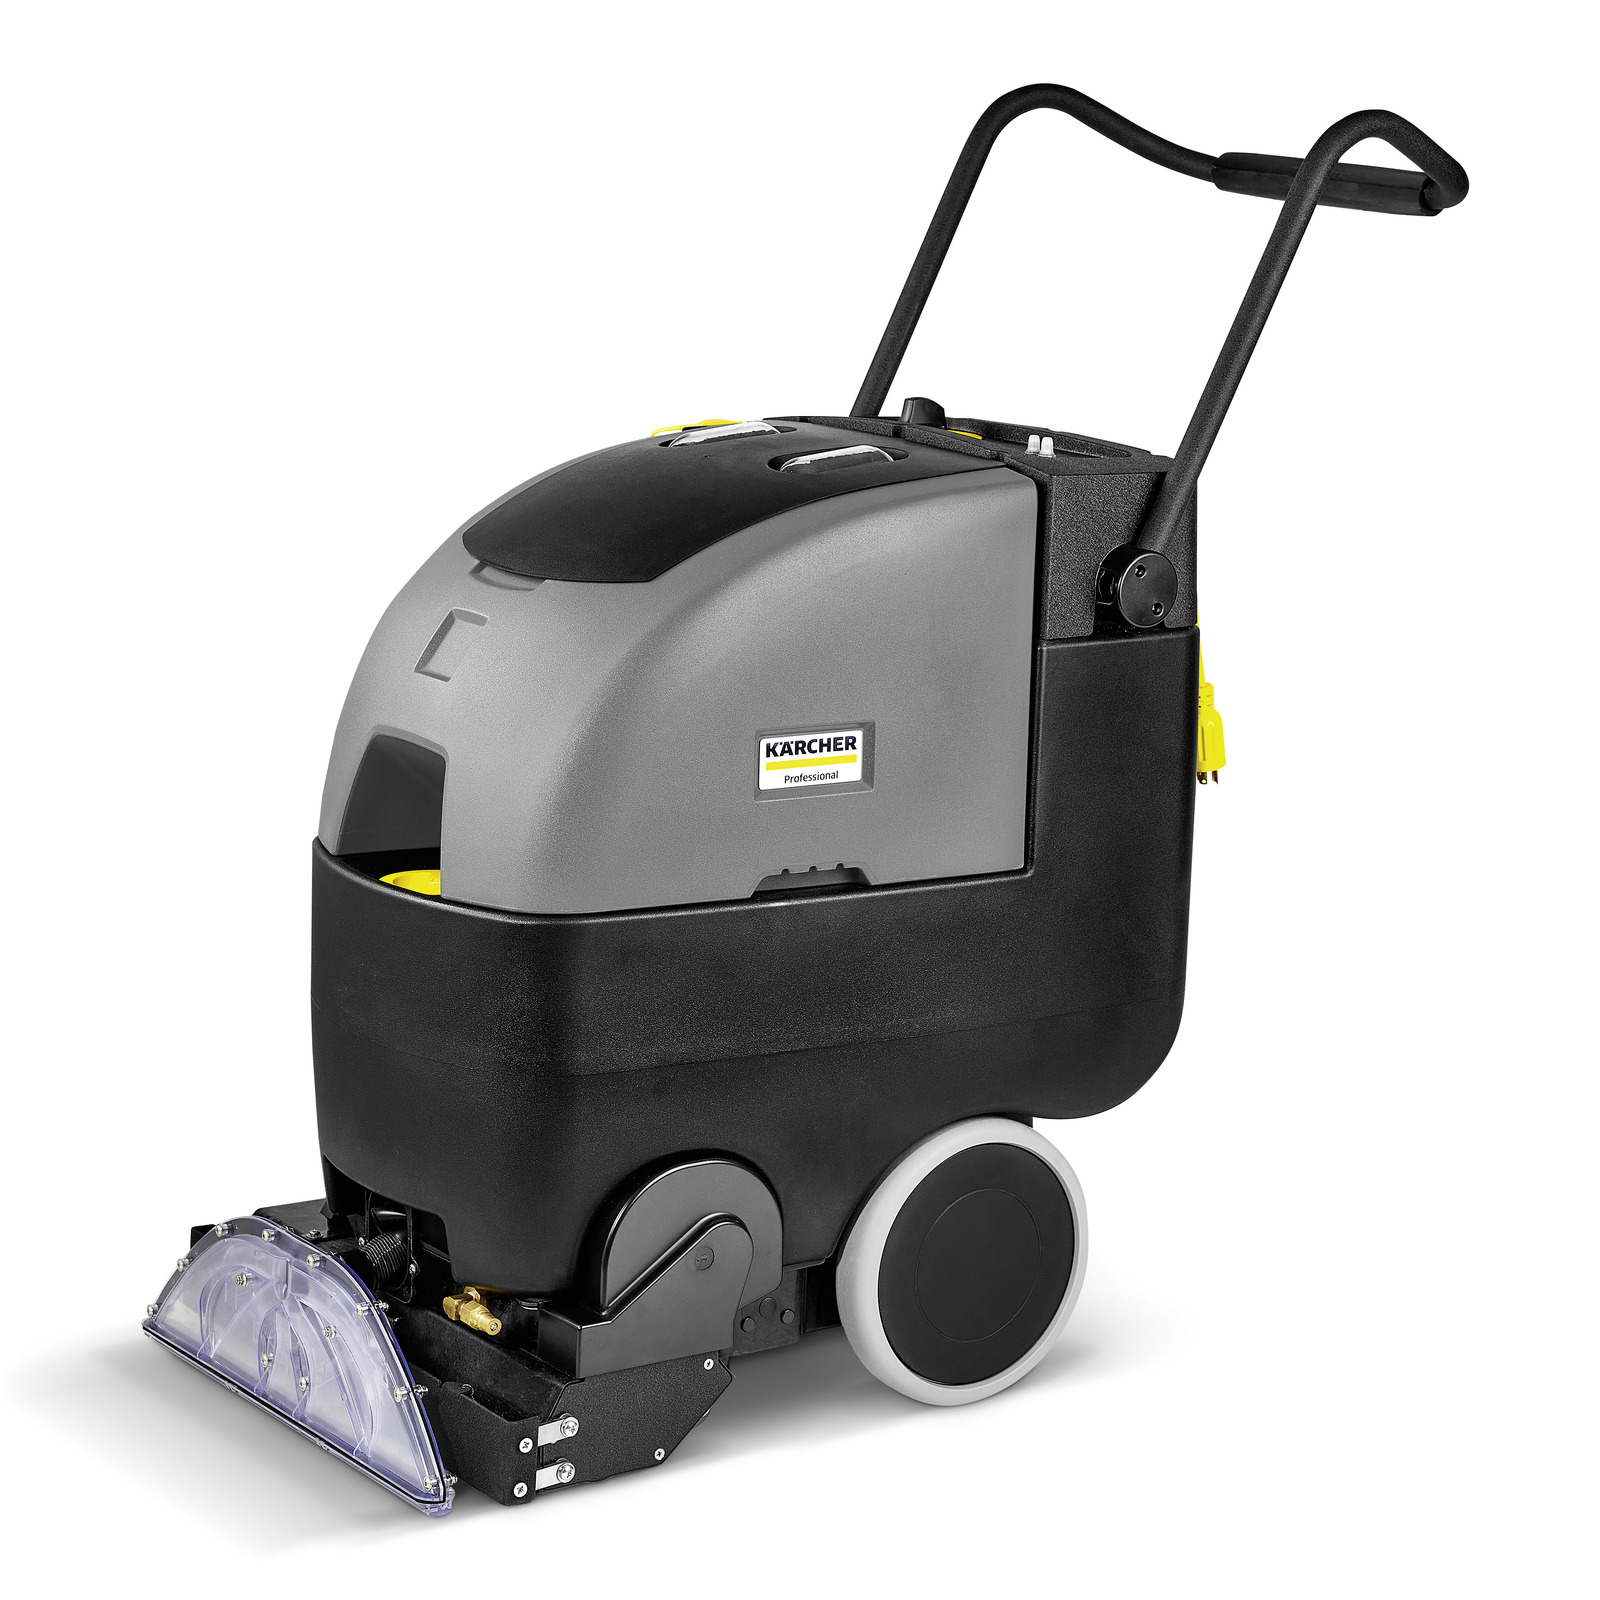 Karcher Admiral XL BRC 45/45 C Carpet Extractor  windsor, karcher, admiral, XL compact, carpet, extractor, rug, cleaning, shampooer, shampoo, commercial, grade, 